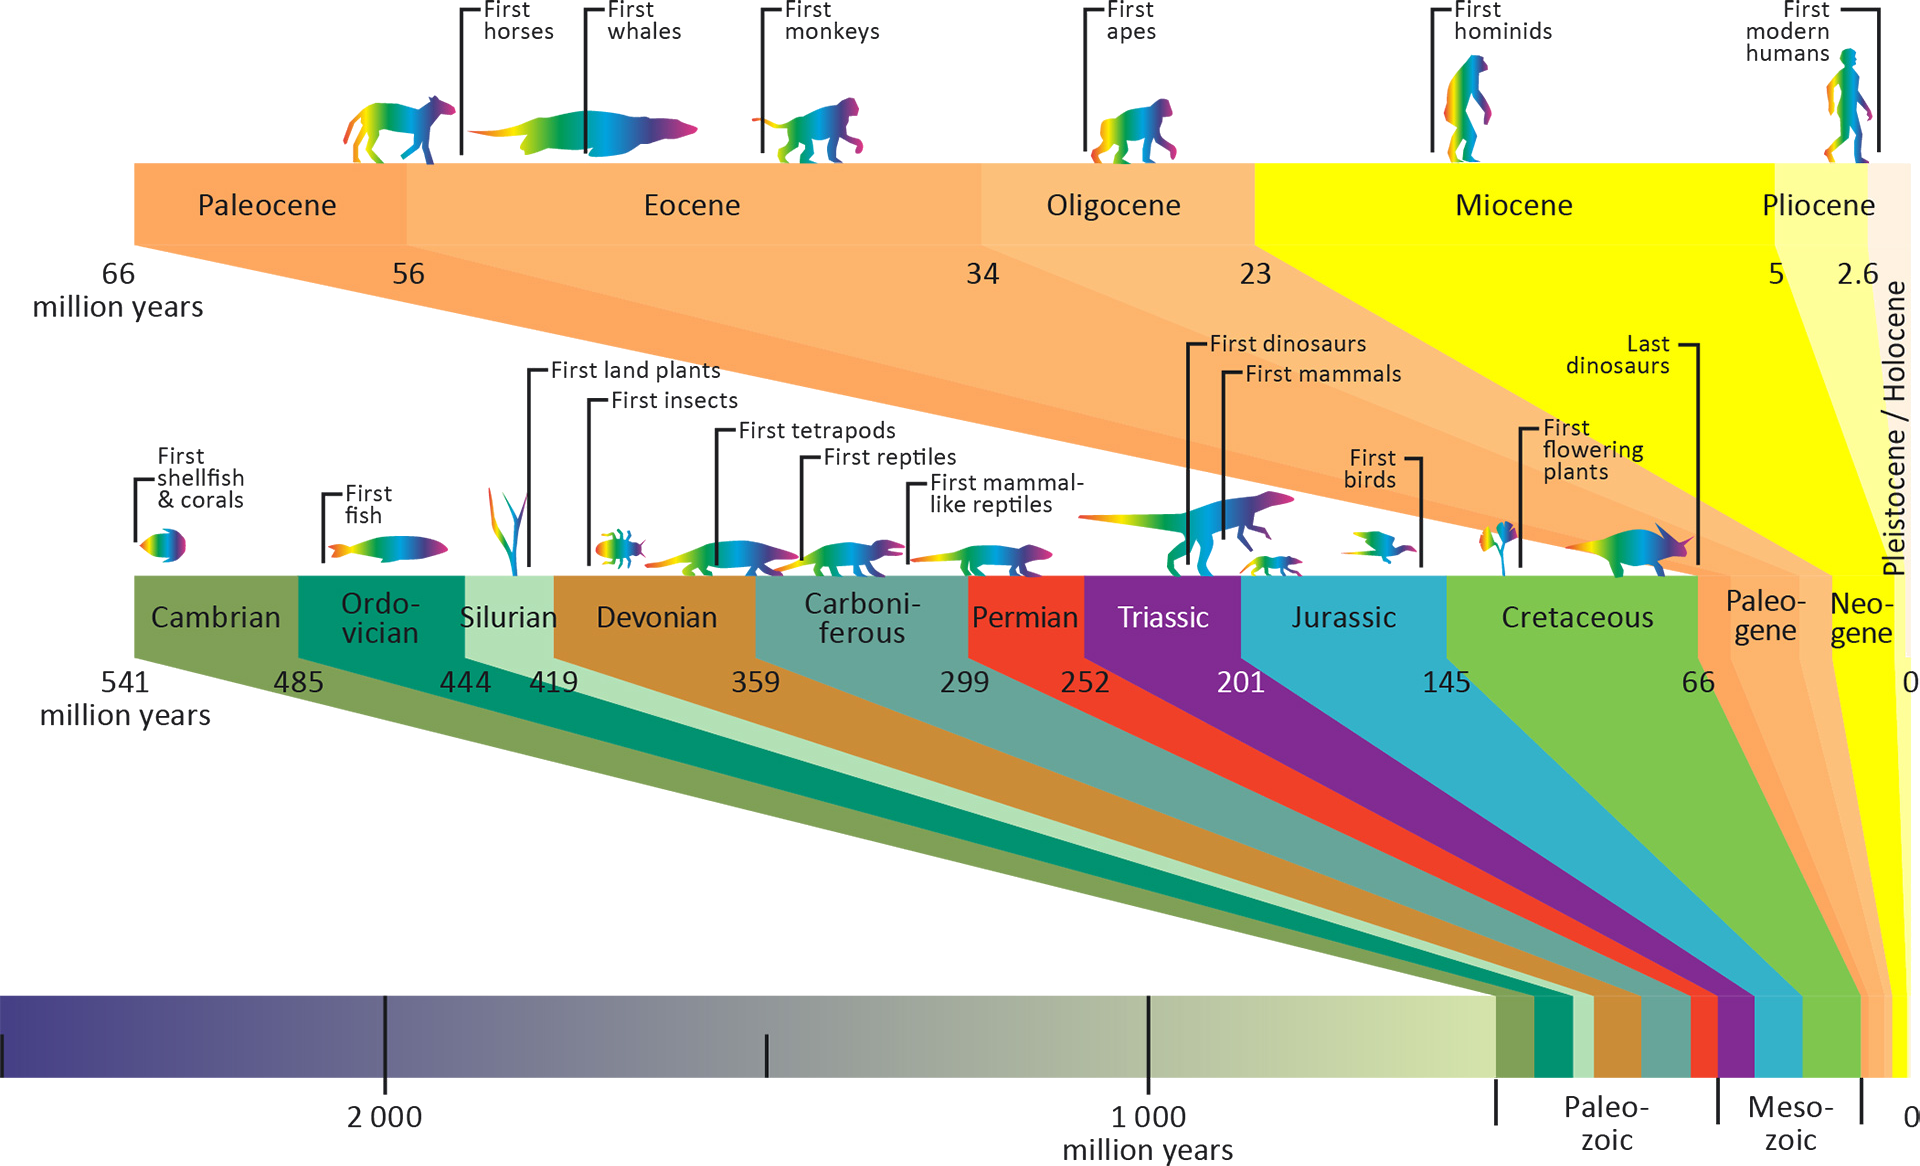 The geological timeline